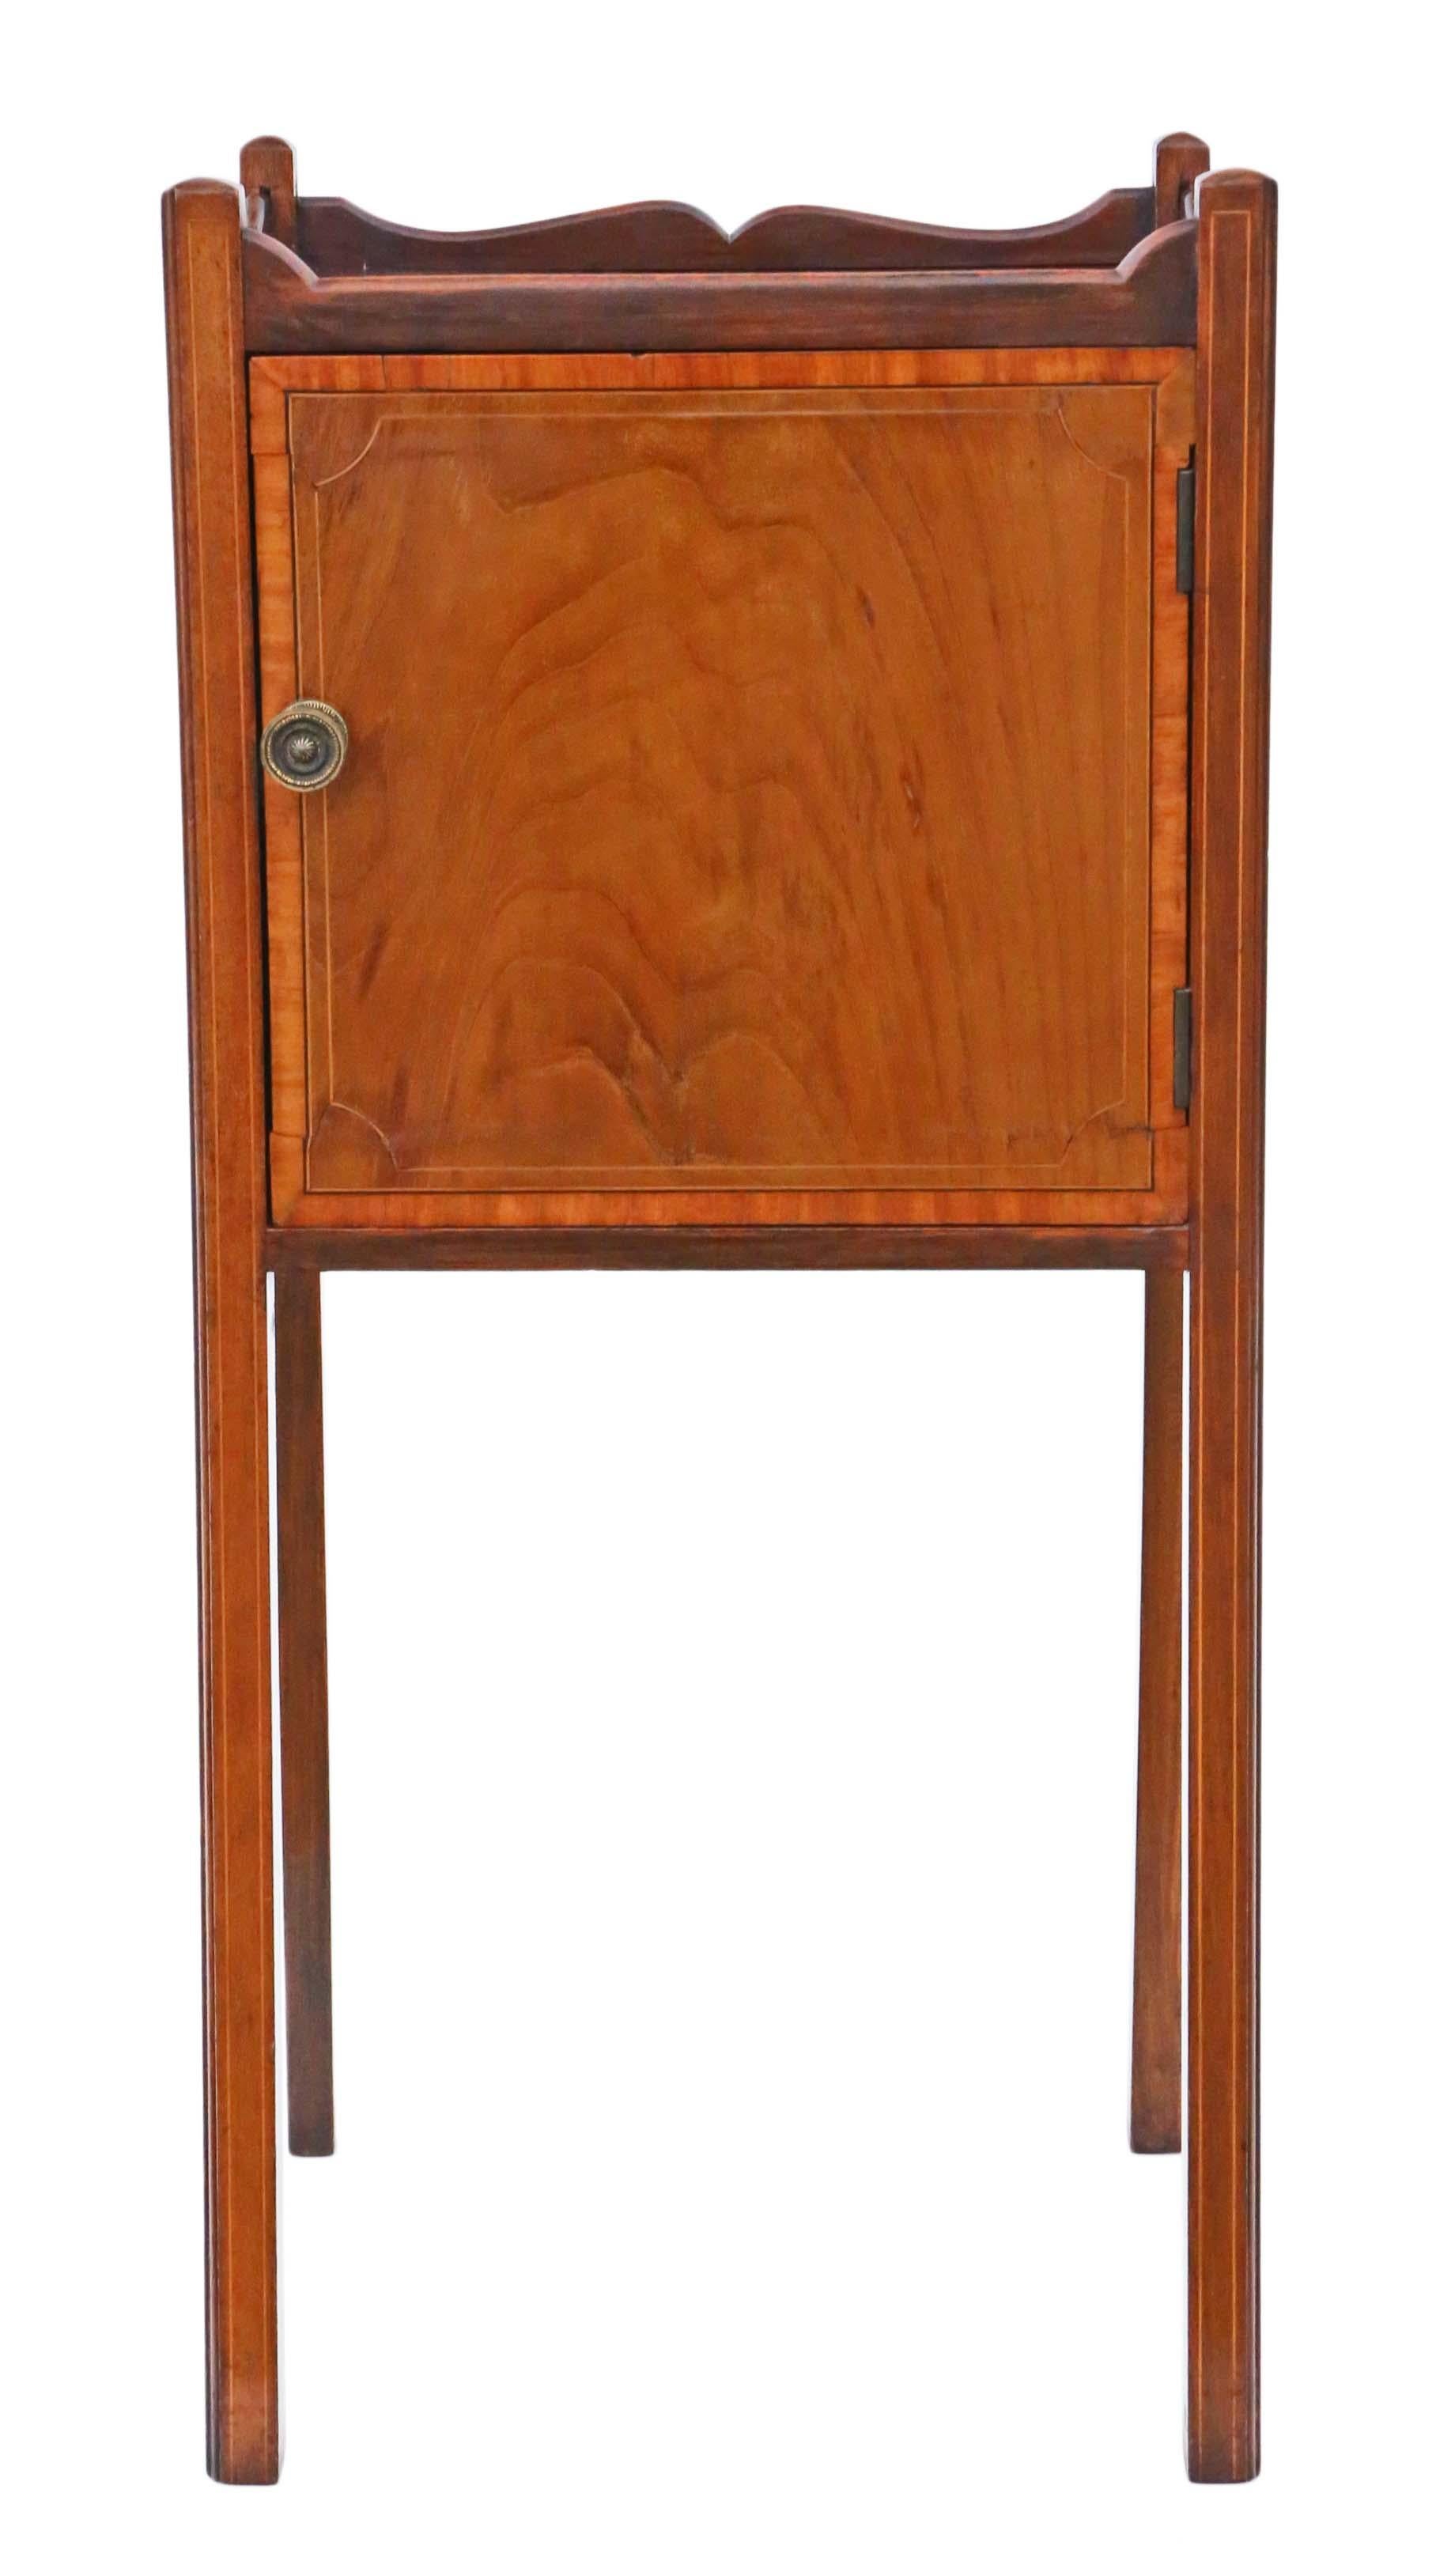 Antique Georgian revival circa 1905 mahogany tray top bedside table or cupboard.
No loose joints and no woodworm. Full of age, character and charm.
Would look great in the right location!
Overall maximum dimensions: 36cm W x 30.5cm D x 78.5cm